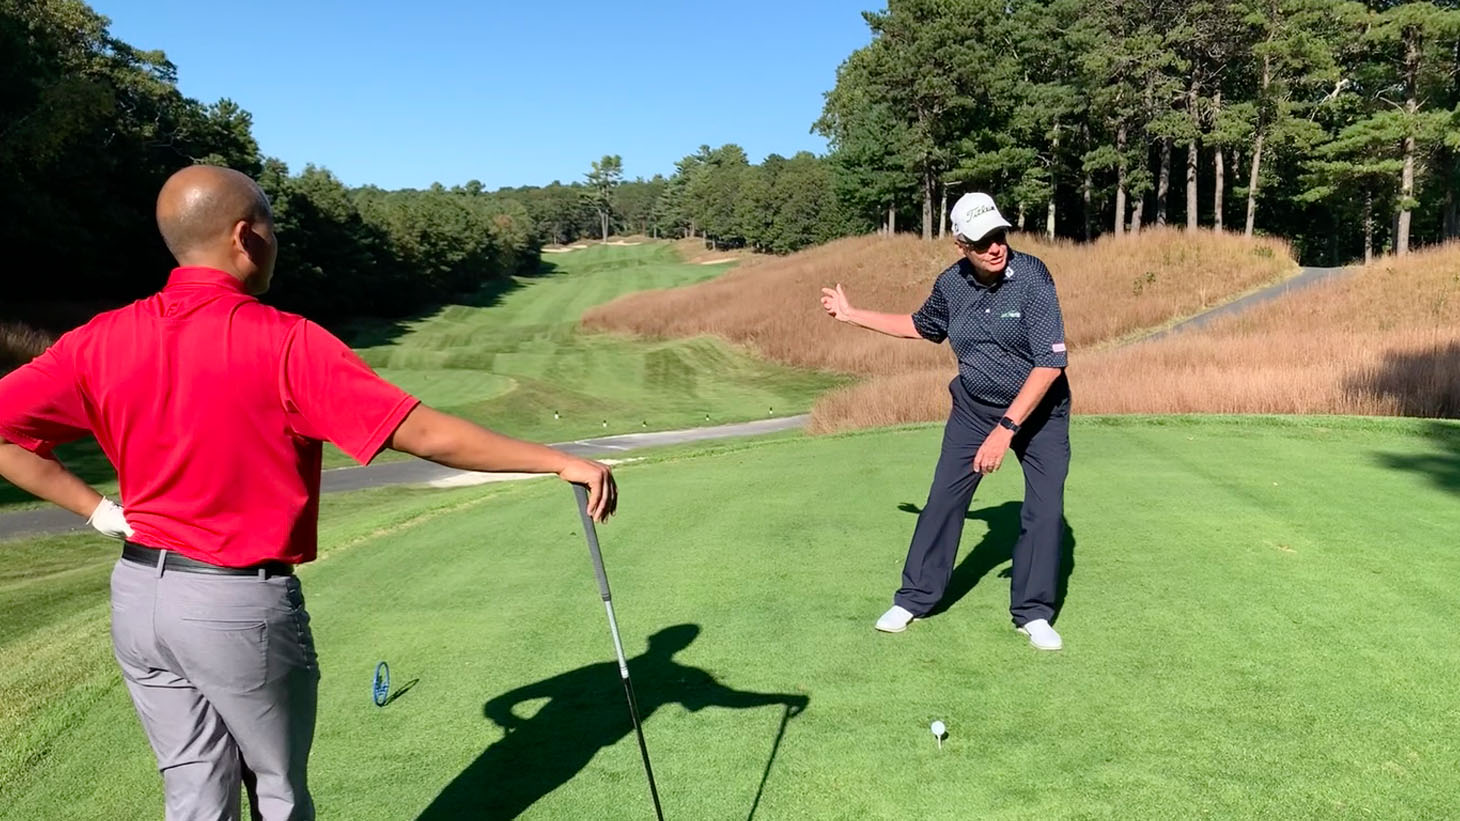 On the tee at No. 3, Skip gave a simple swing...